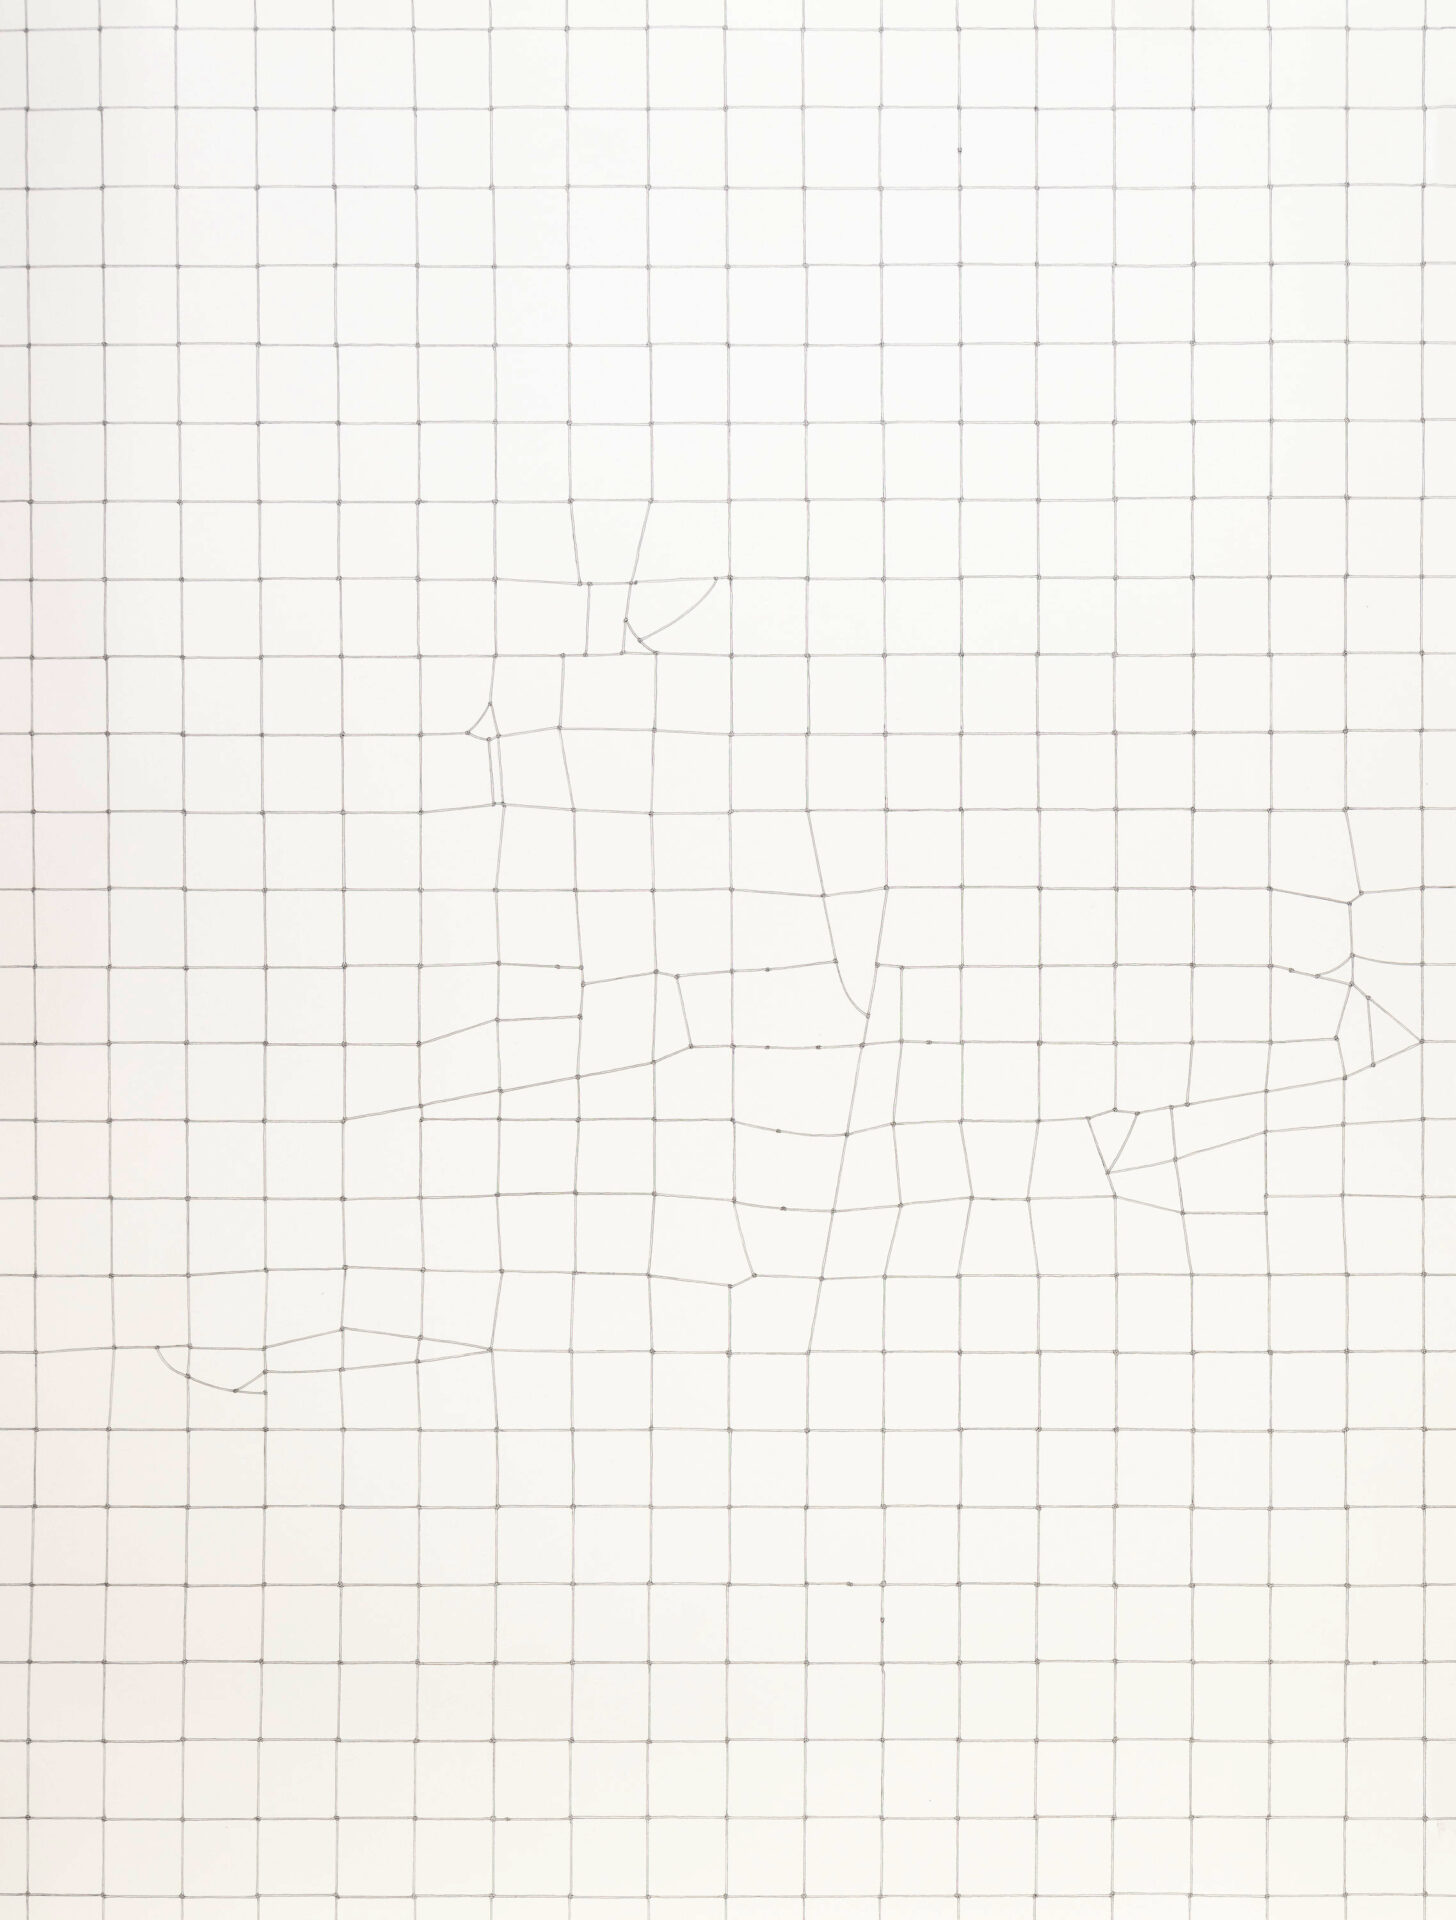 Fine line drawing of a net laid out in a grid with occasional changes and breaks to the pattern.